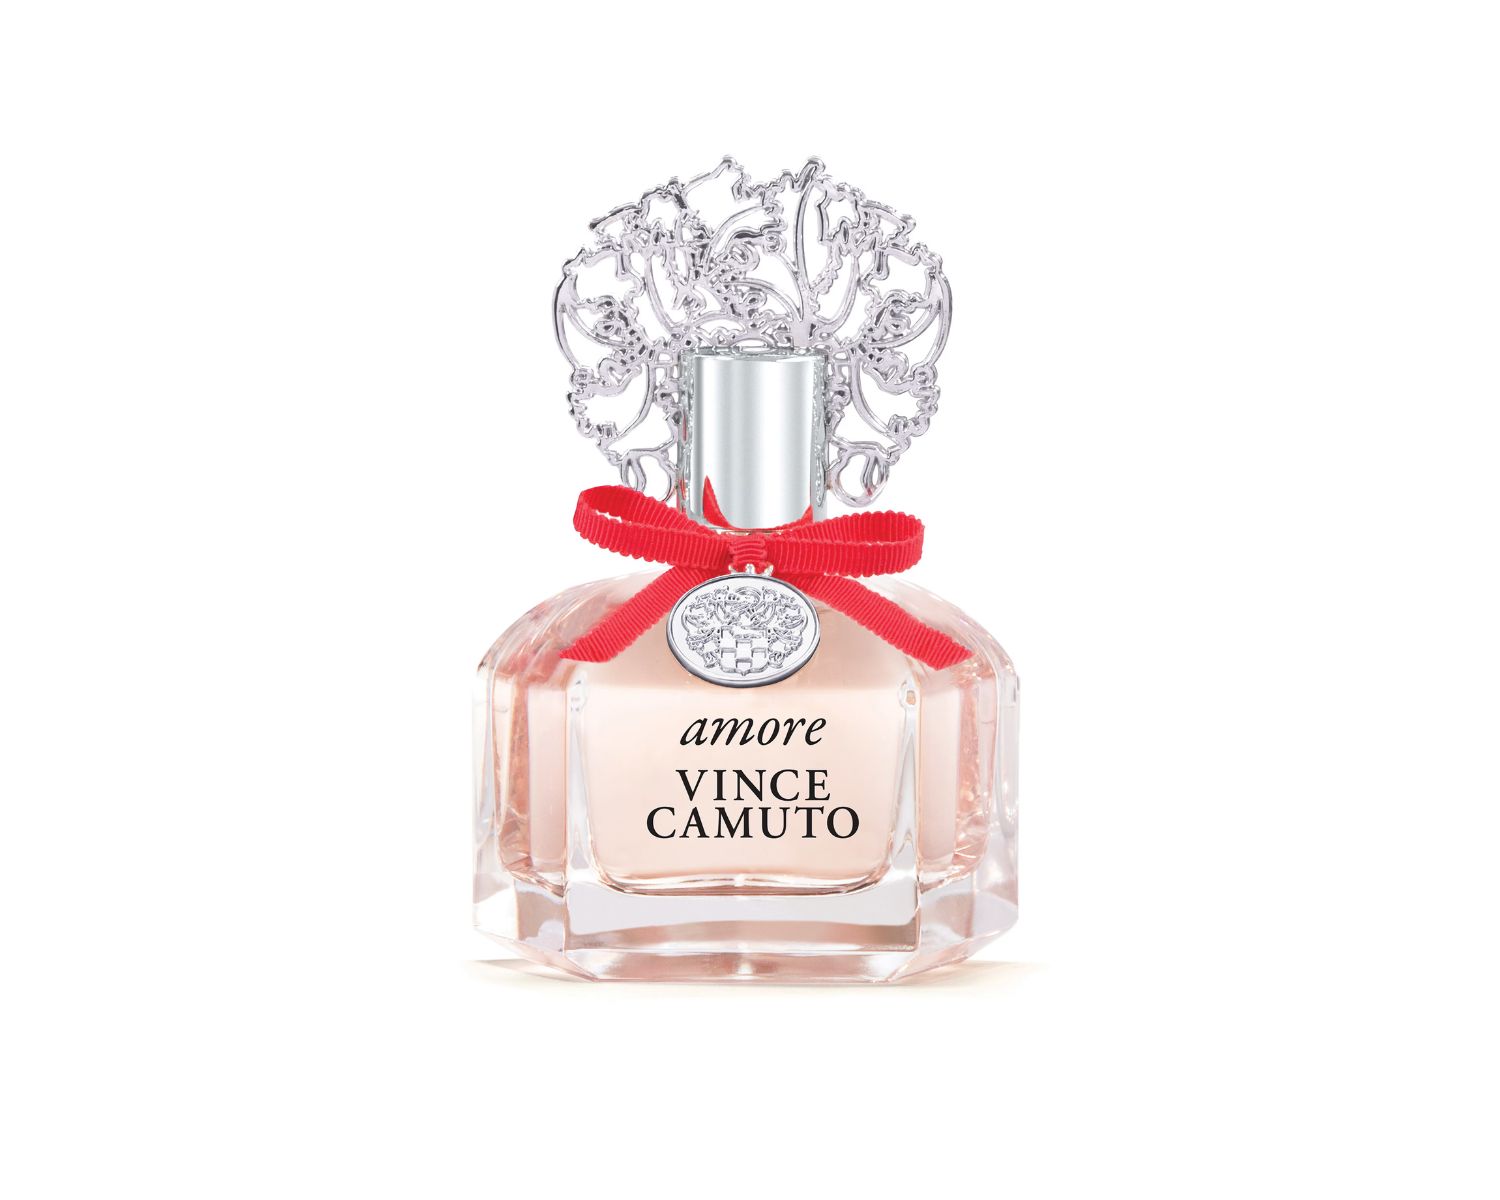 Vince Camuto, Other, Vince Camuto Amore Womens Perfume